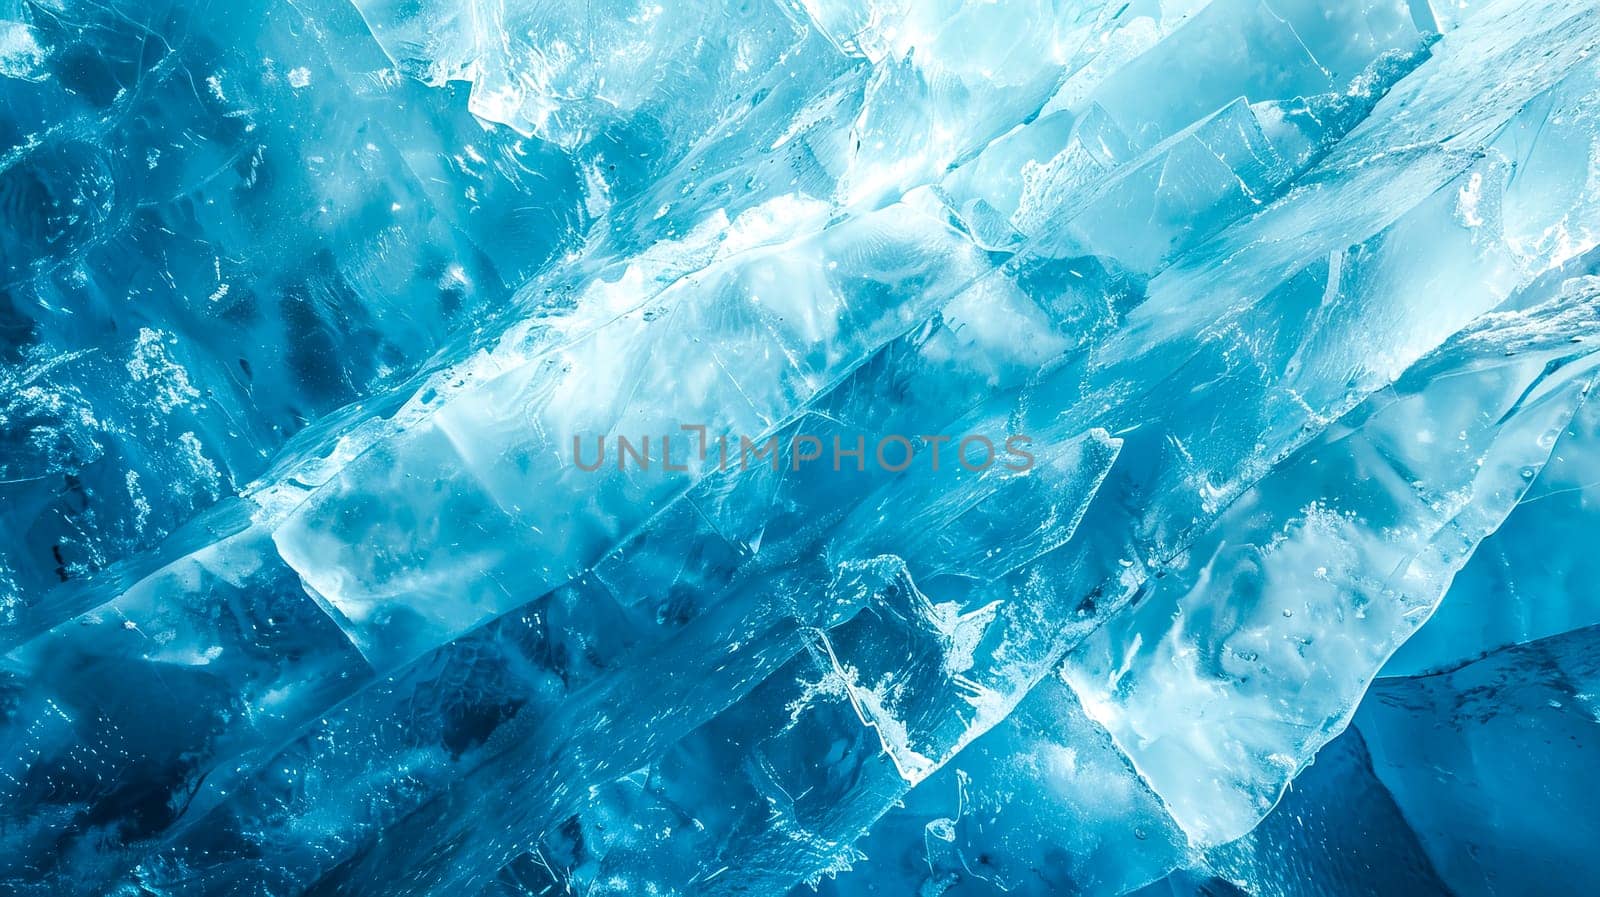 Mesmerizing and detailed close-up shots of crystal blue ice textures in the frigid arctic environment. Showcasing the natural patterns and abstract structures of the frozen. Transparent